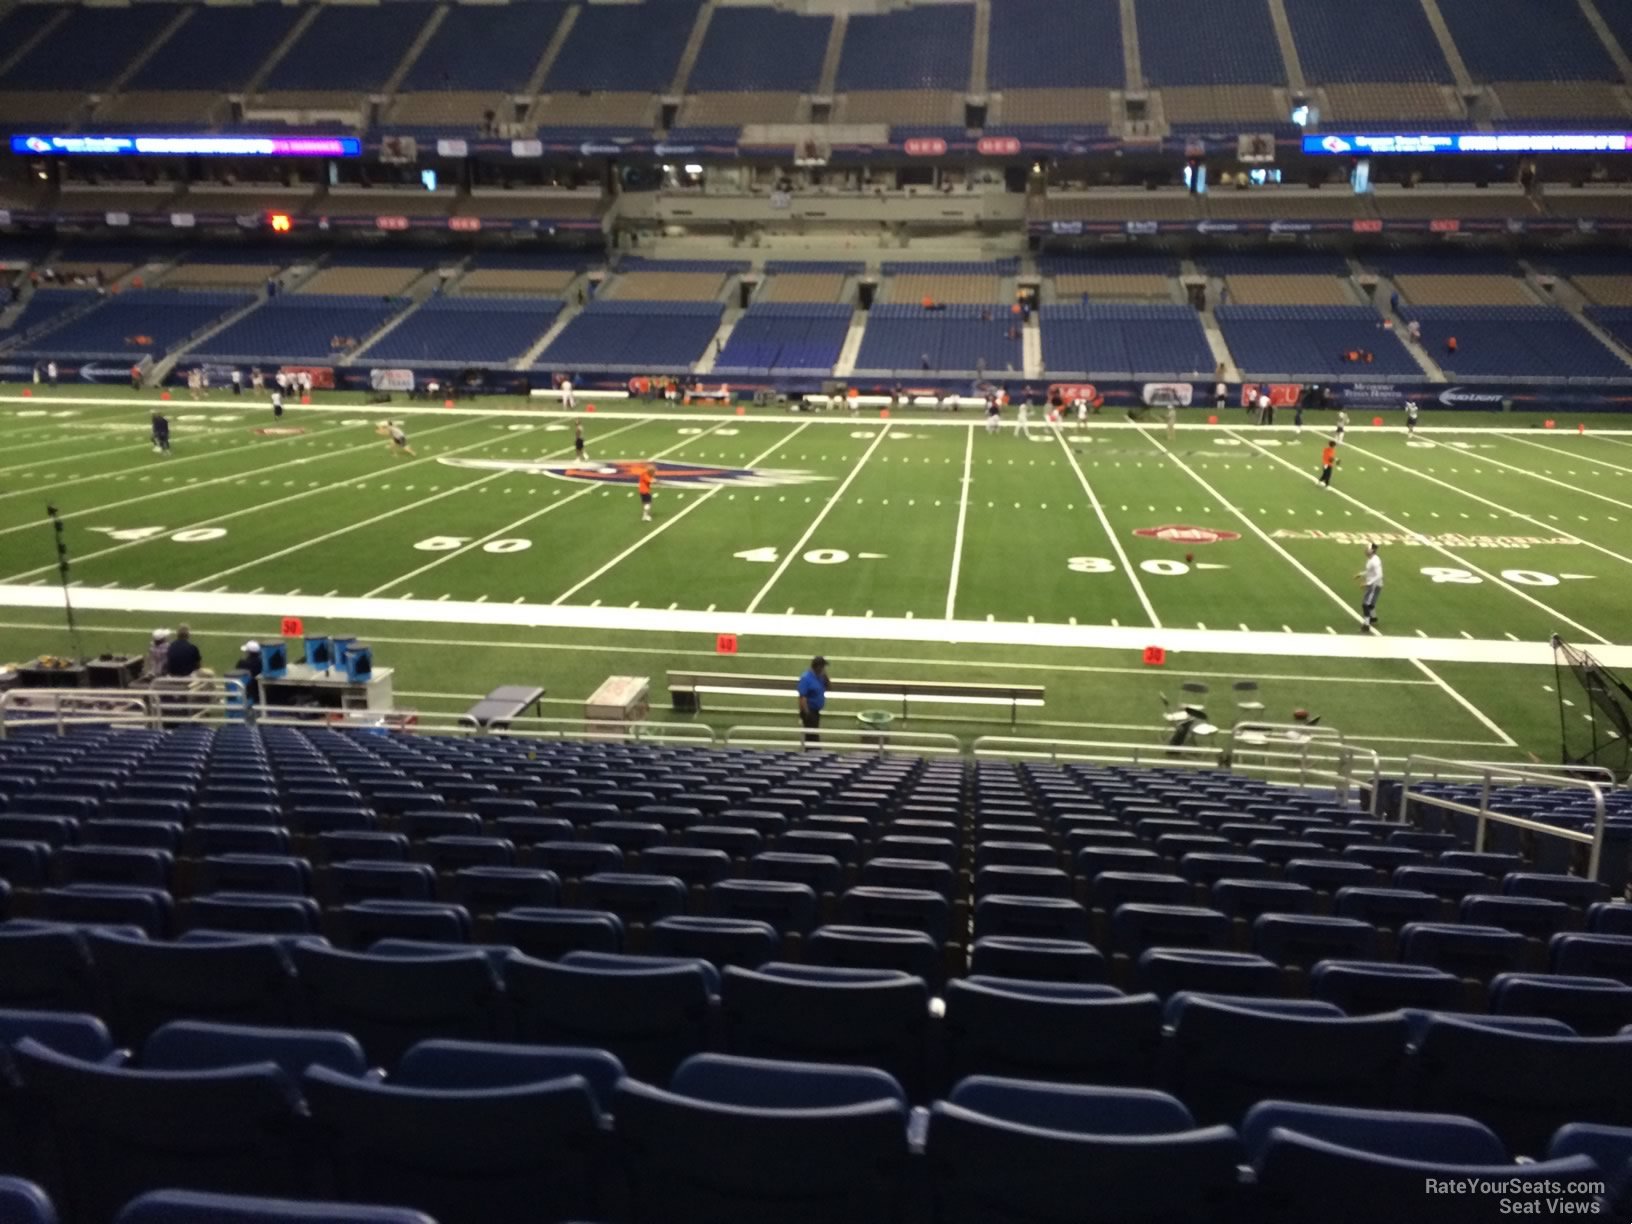 section 133, row 18 seat view  for football - alamodome